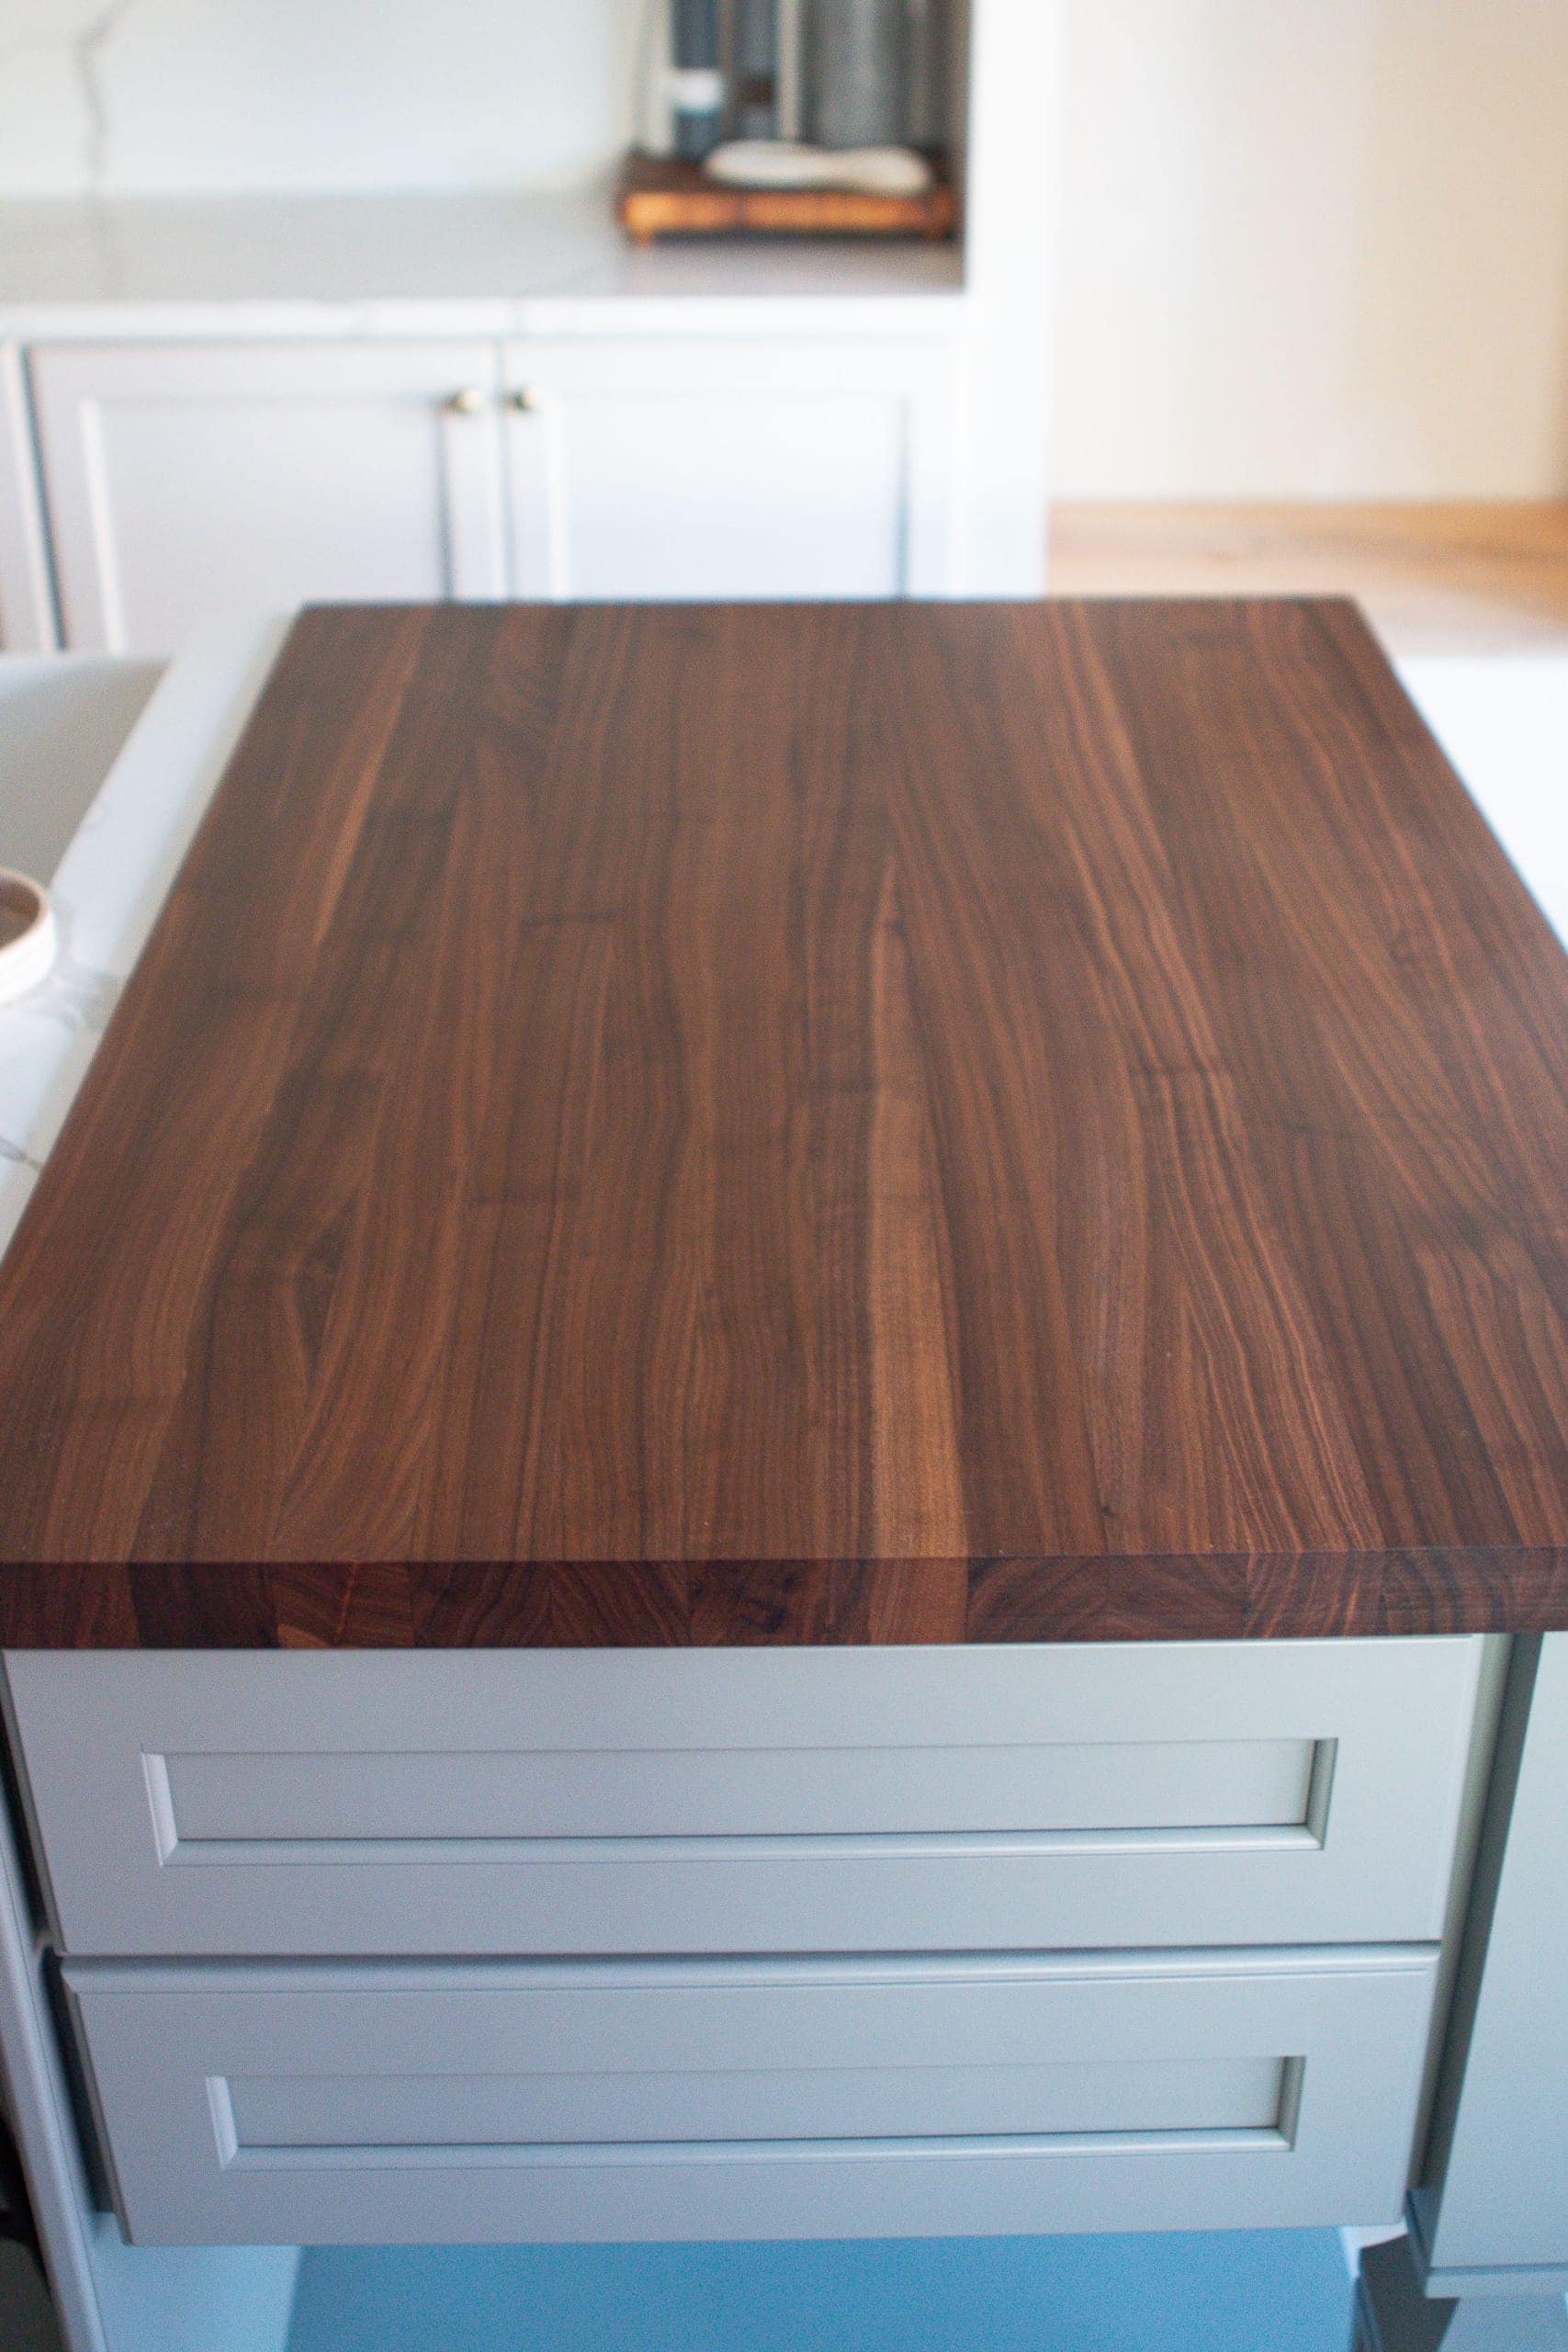 The wood tones on our kitchen island